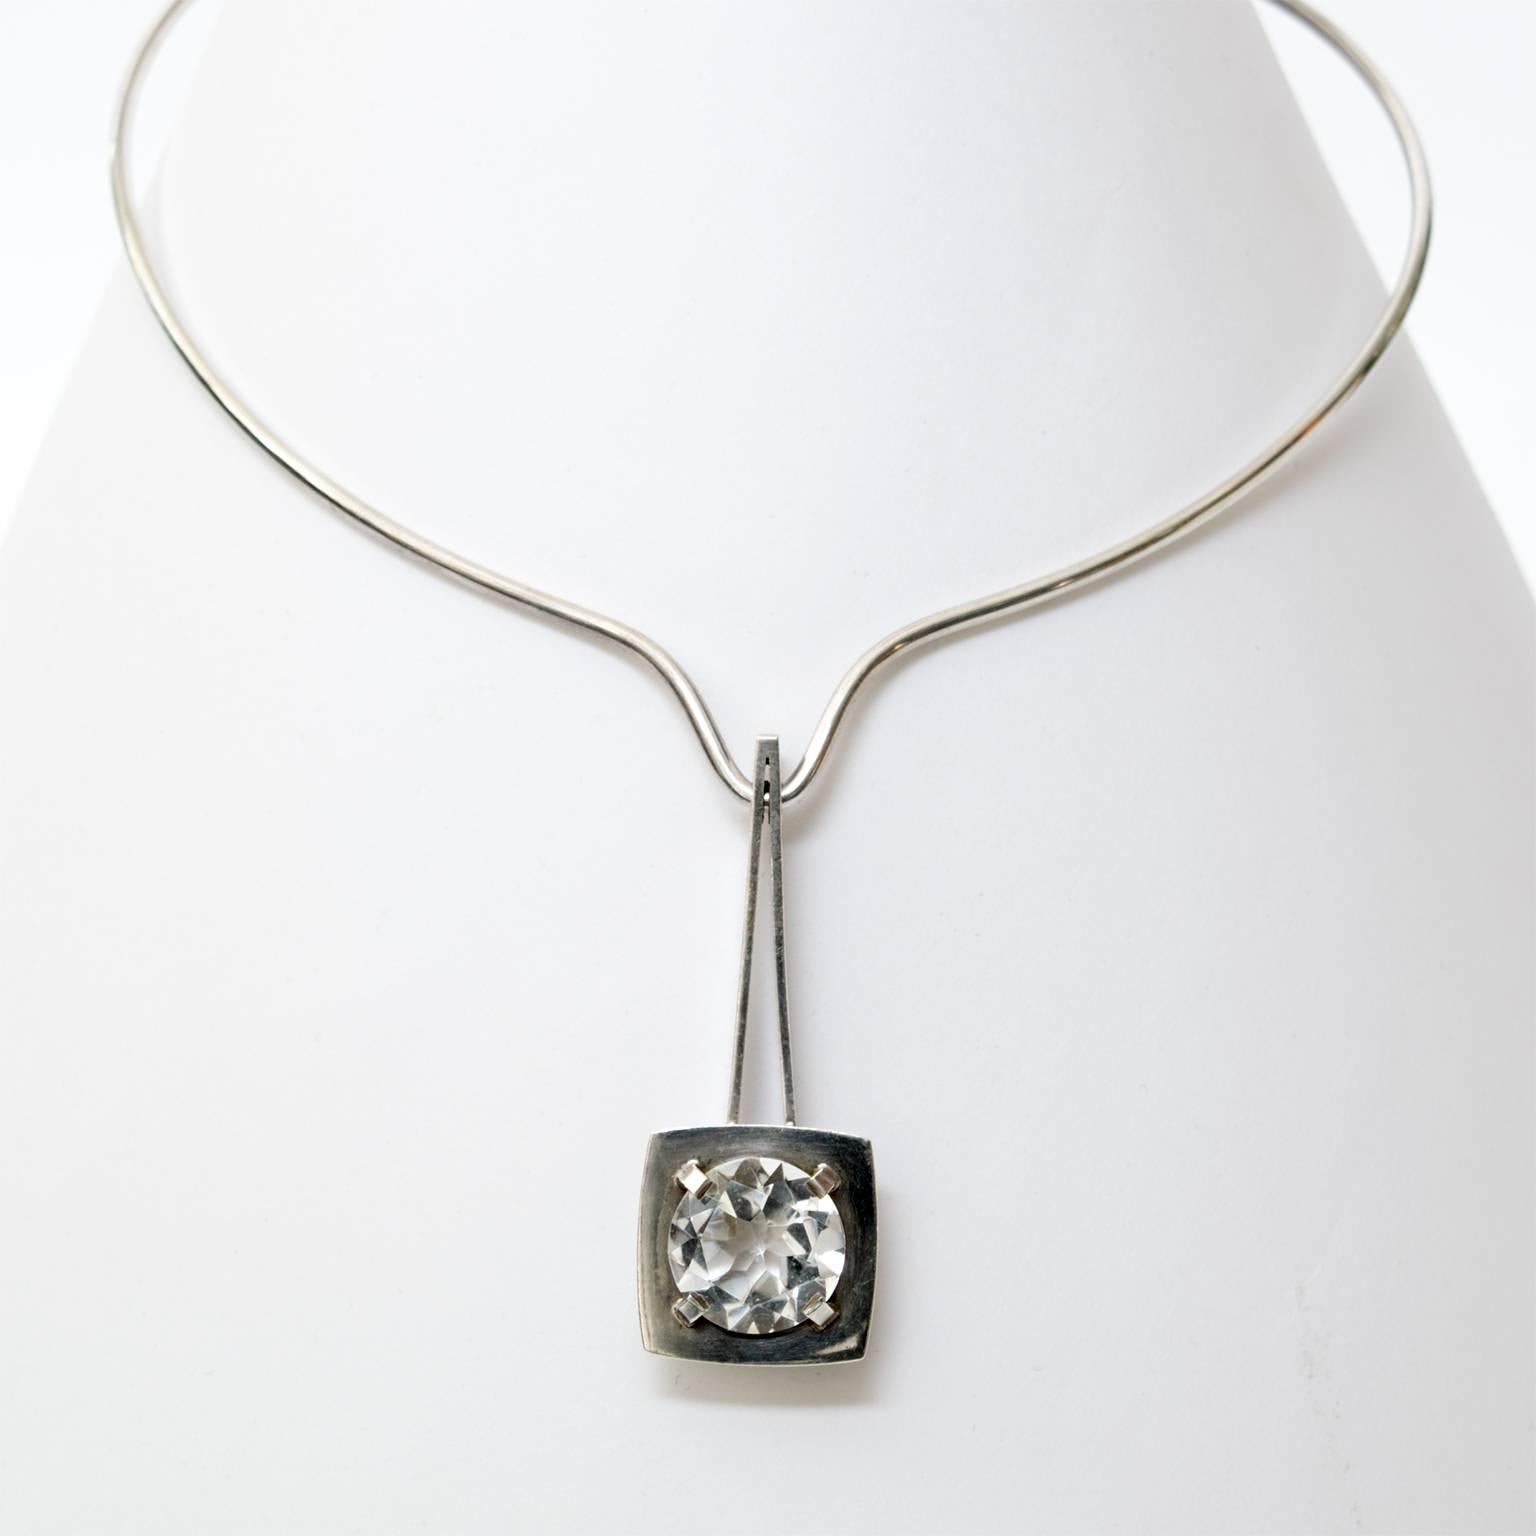 Silver necklace with a pendant holding a faceted rock crystal. Designed by Sven Haugaard, Denmark.